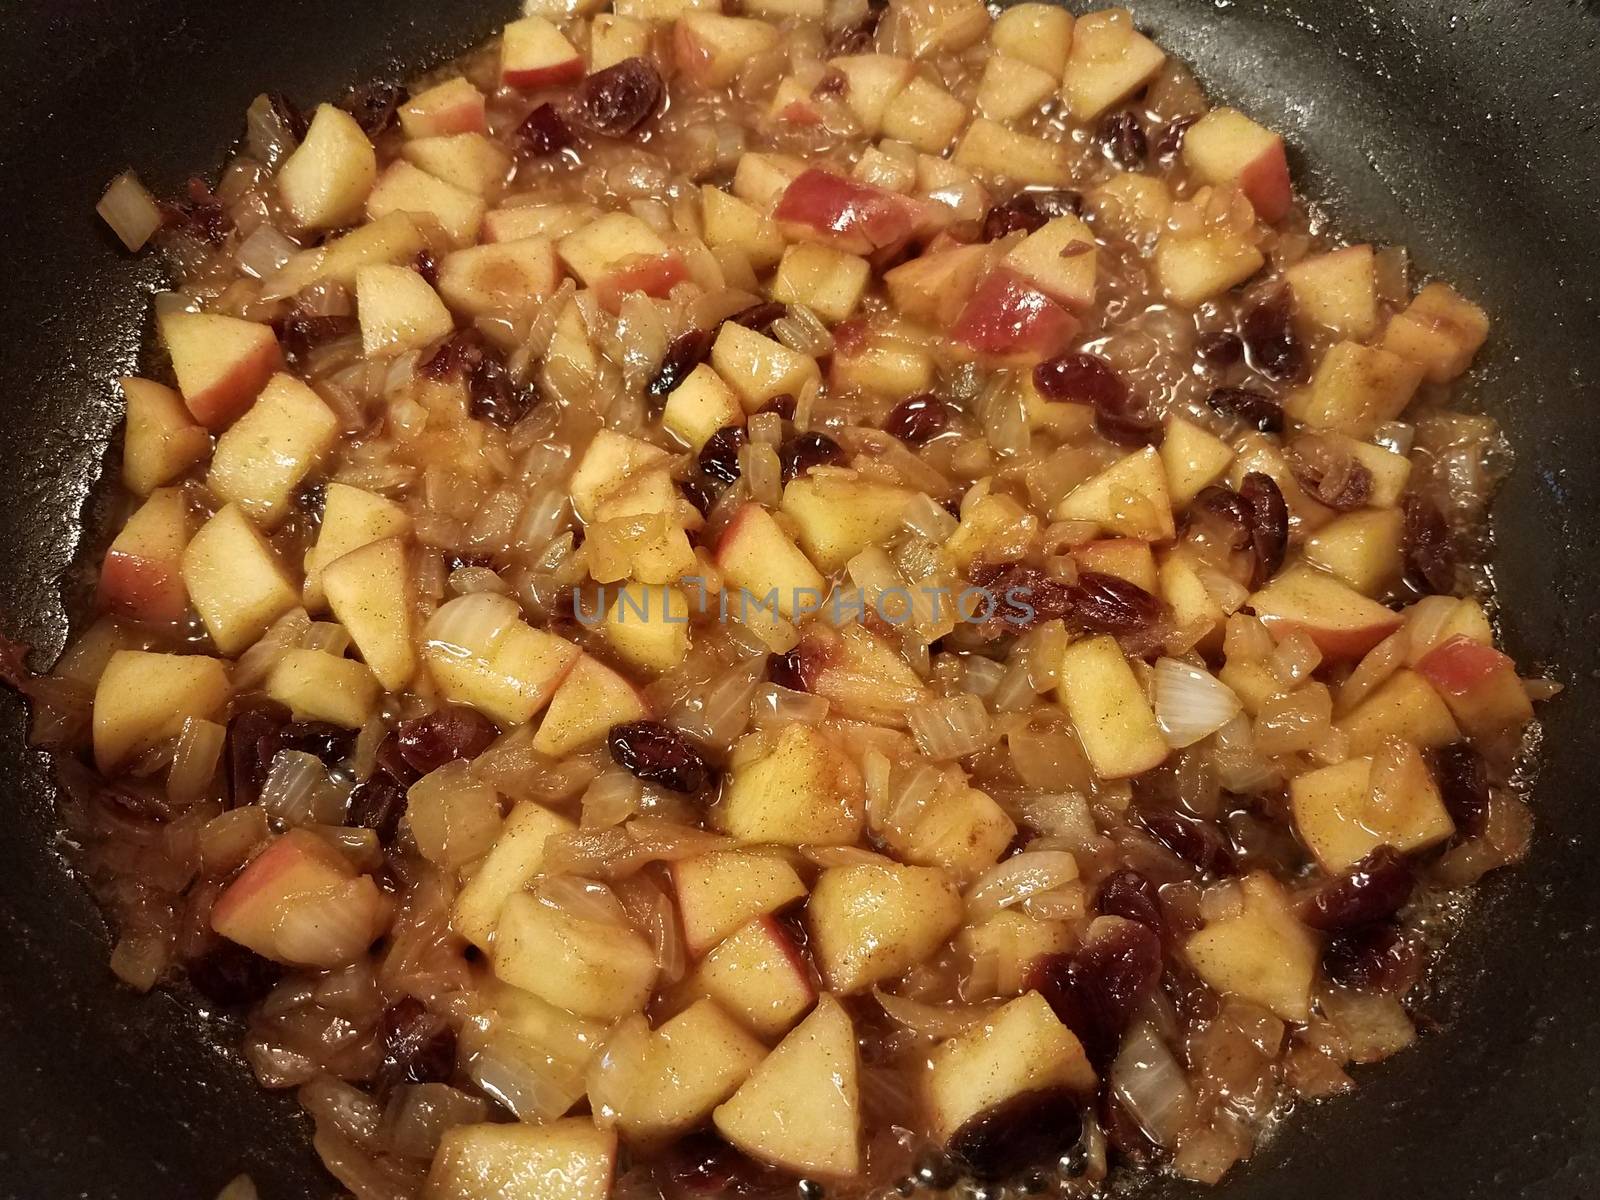 apples and cranberries and fruit in sauce cooking in a frying pan